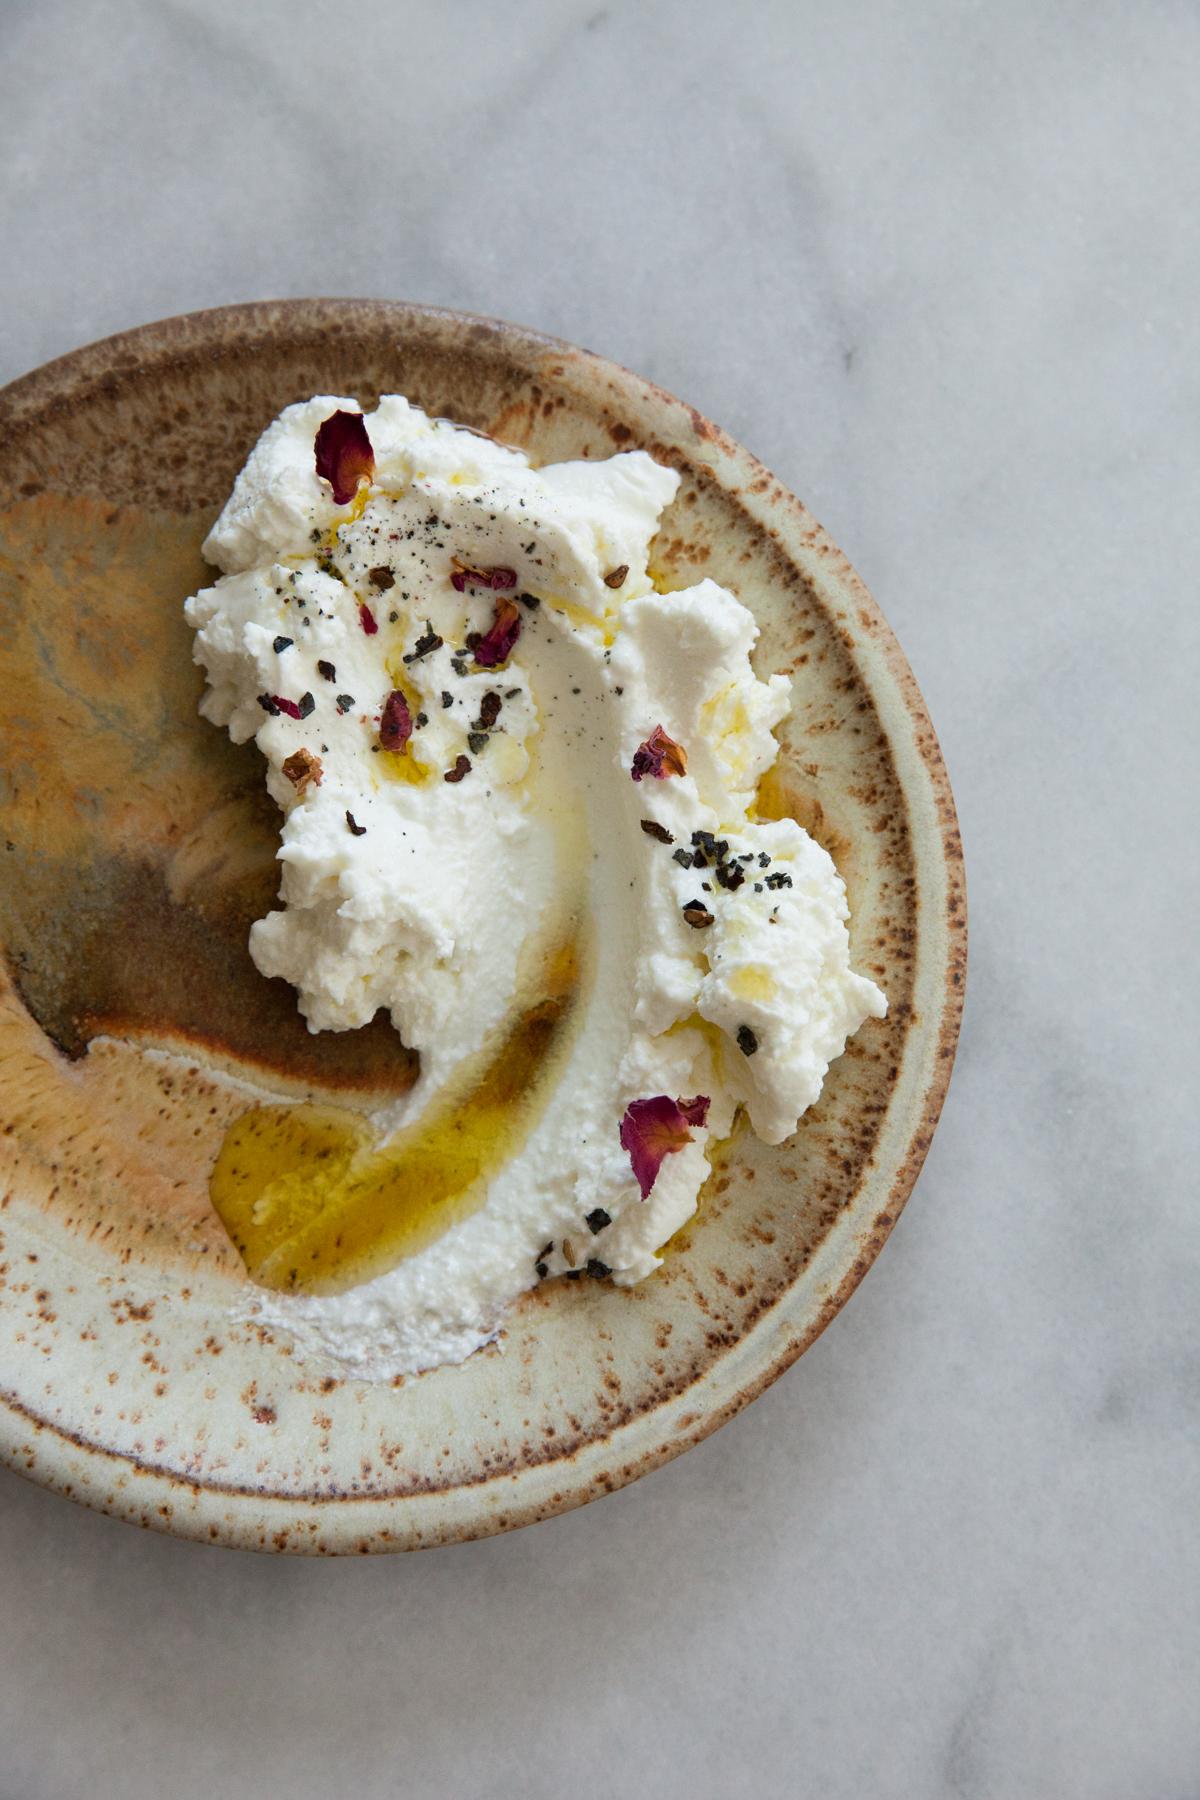 Goat's cheese is a simple, creamy cheese. Stephanie Mahmoud